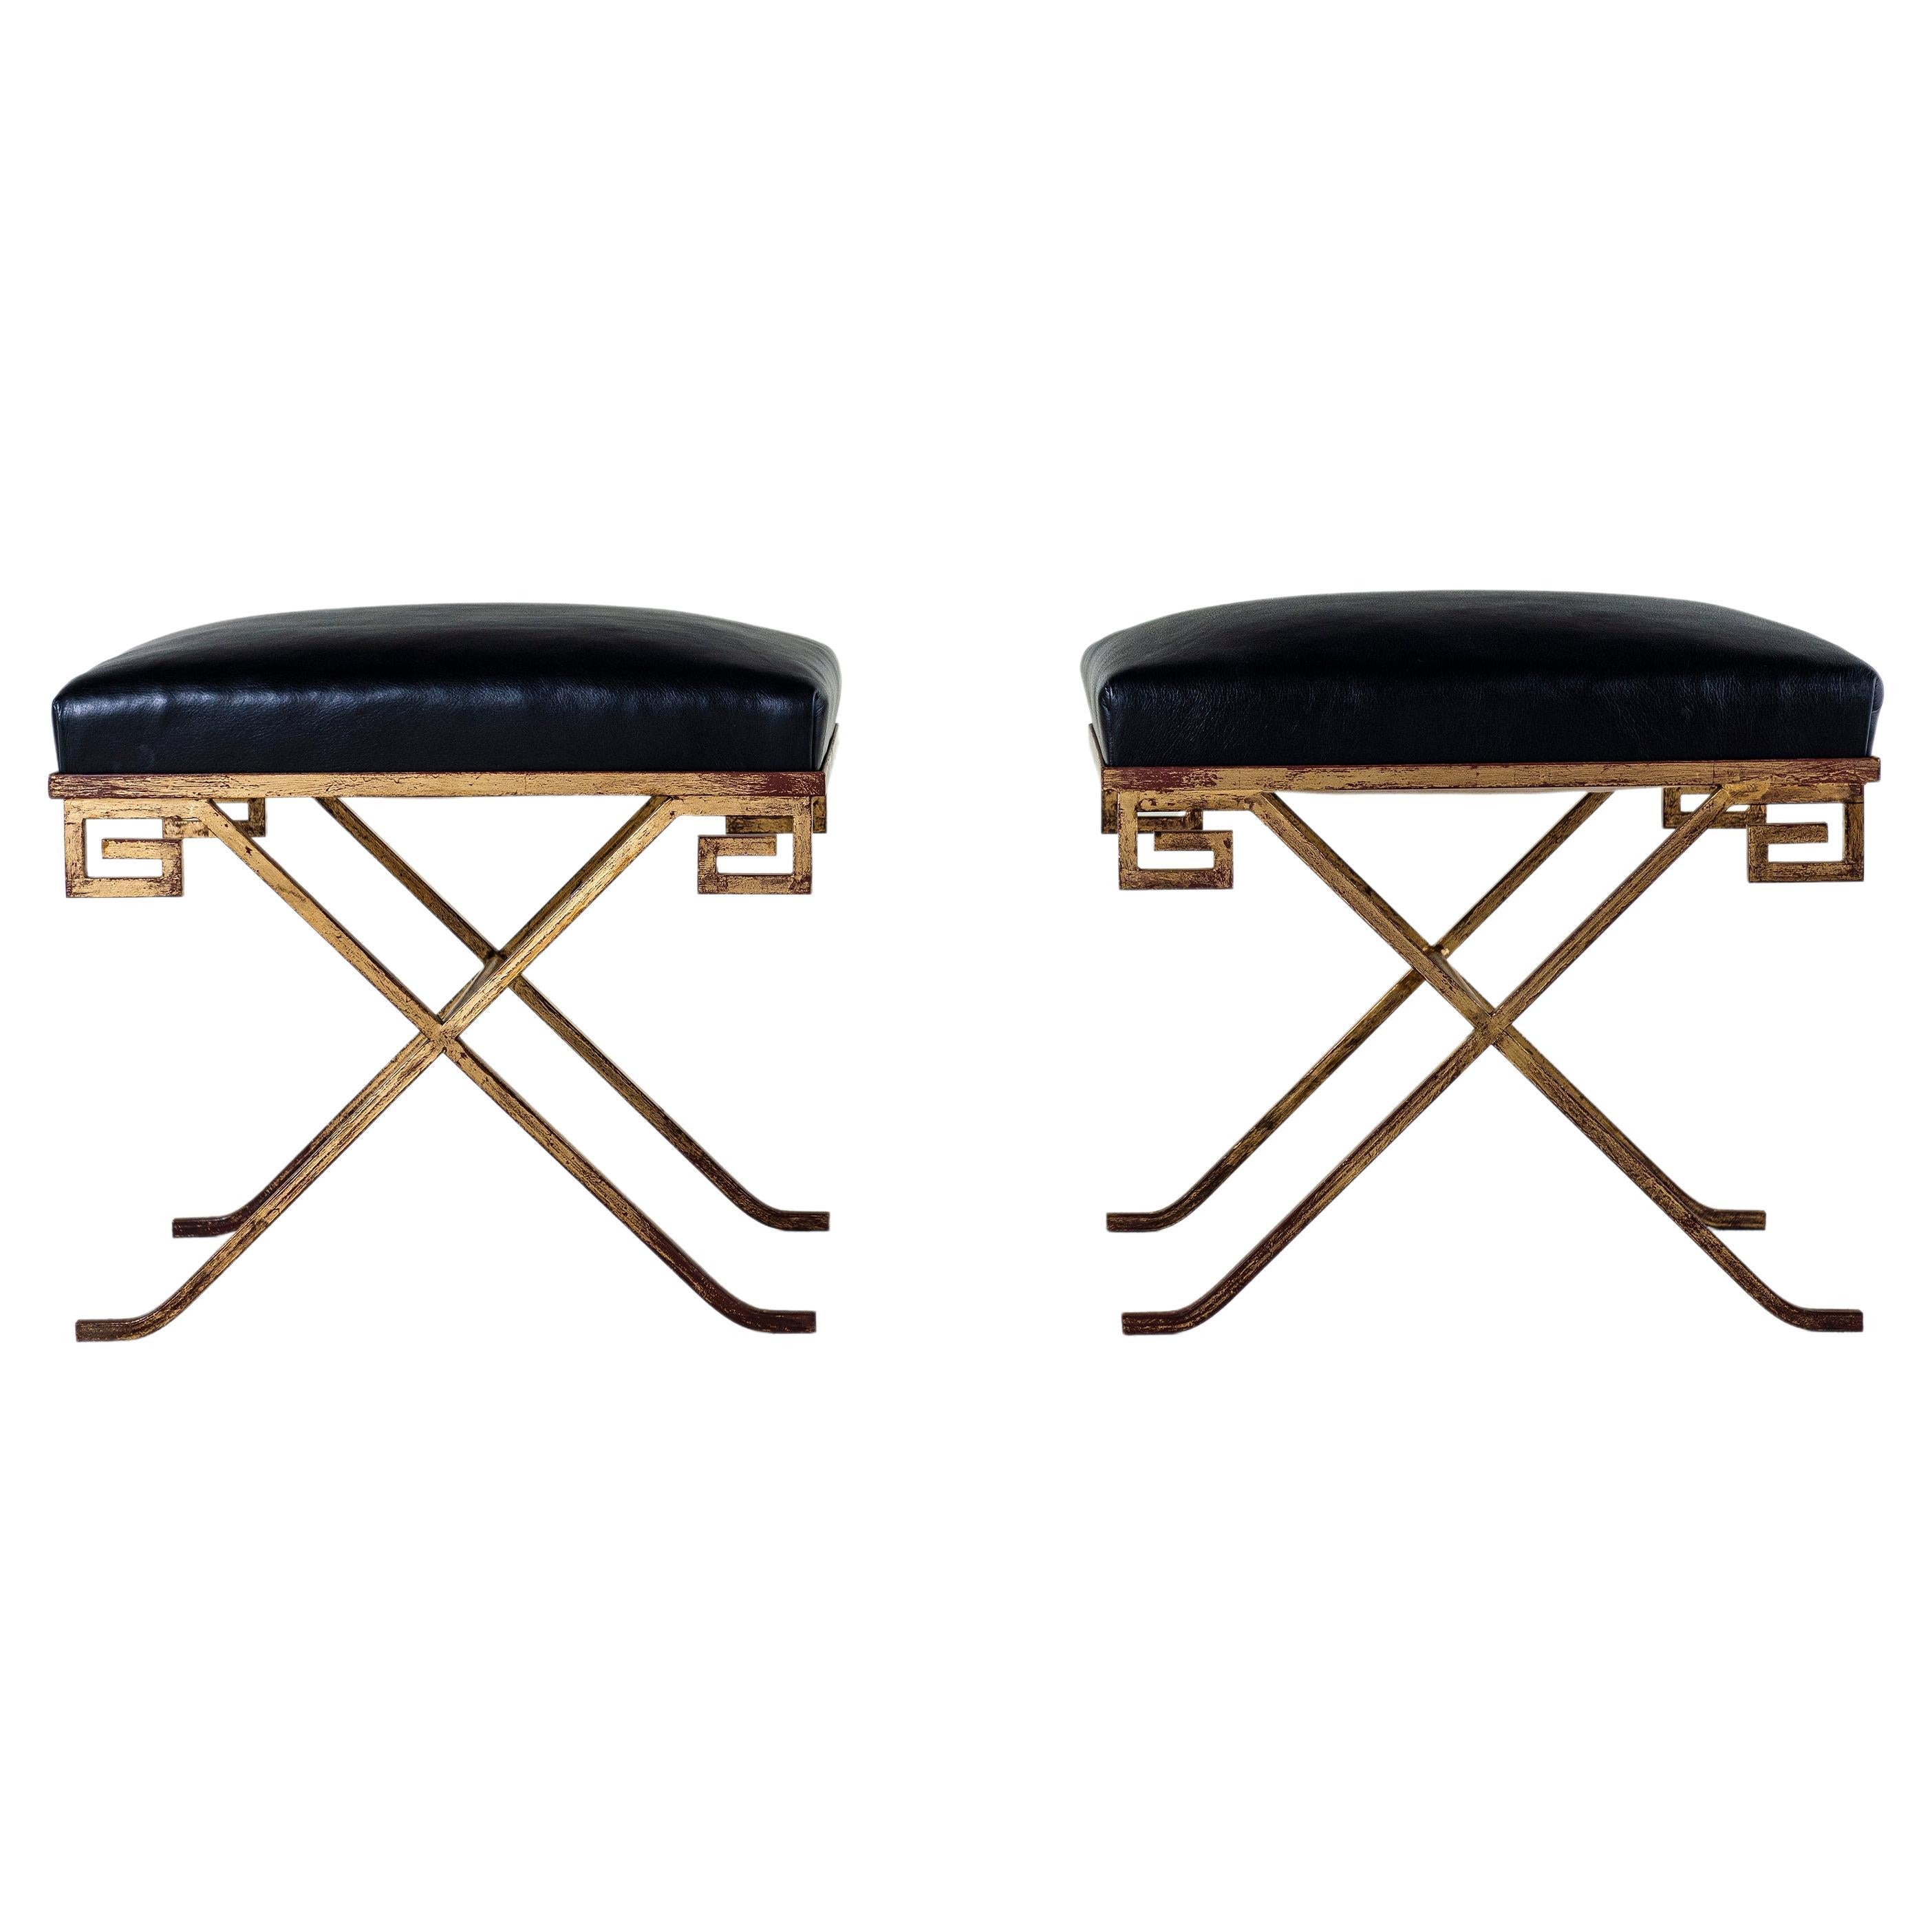 Pair of gilt iron and leather stools designed by Jean-Michel Frank, circa 1938